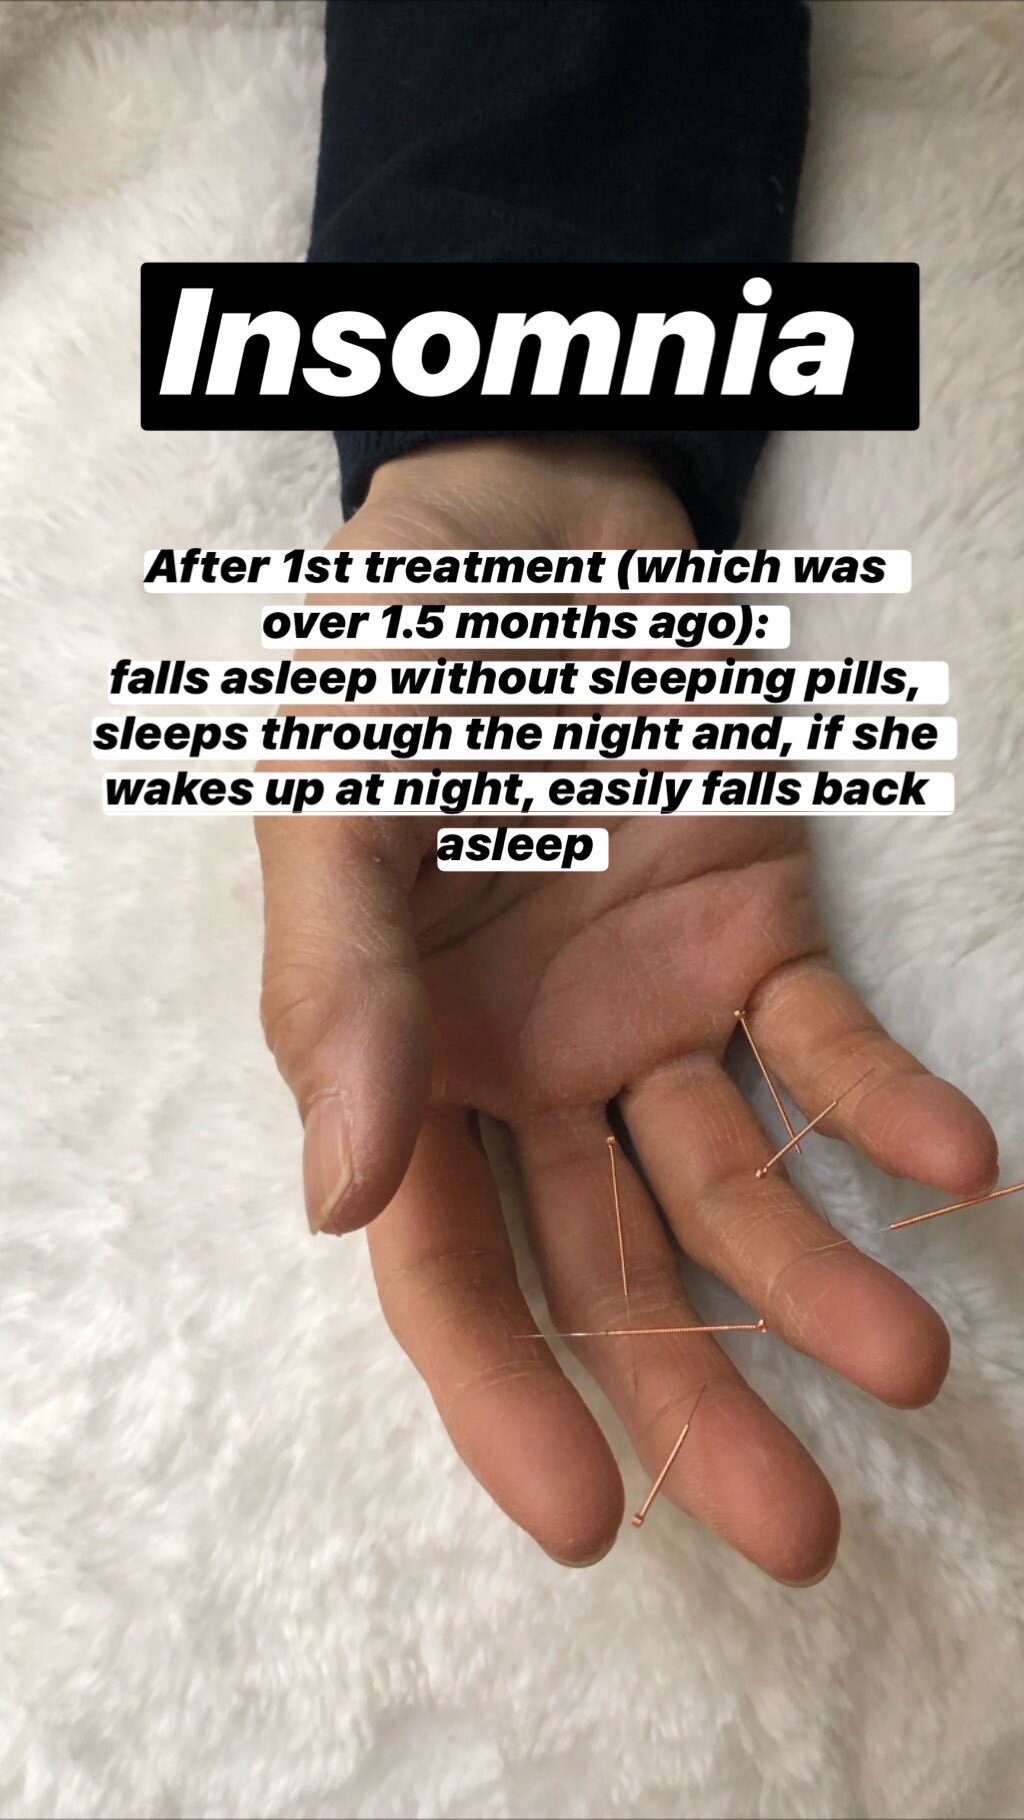  SuJok Acupuncture in Vancouver used as alternative treatment for insomnia. Patient was able to sleep normally after first treatment.  